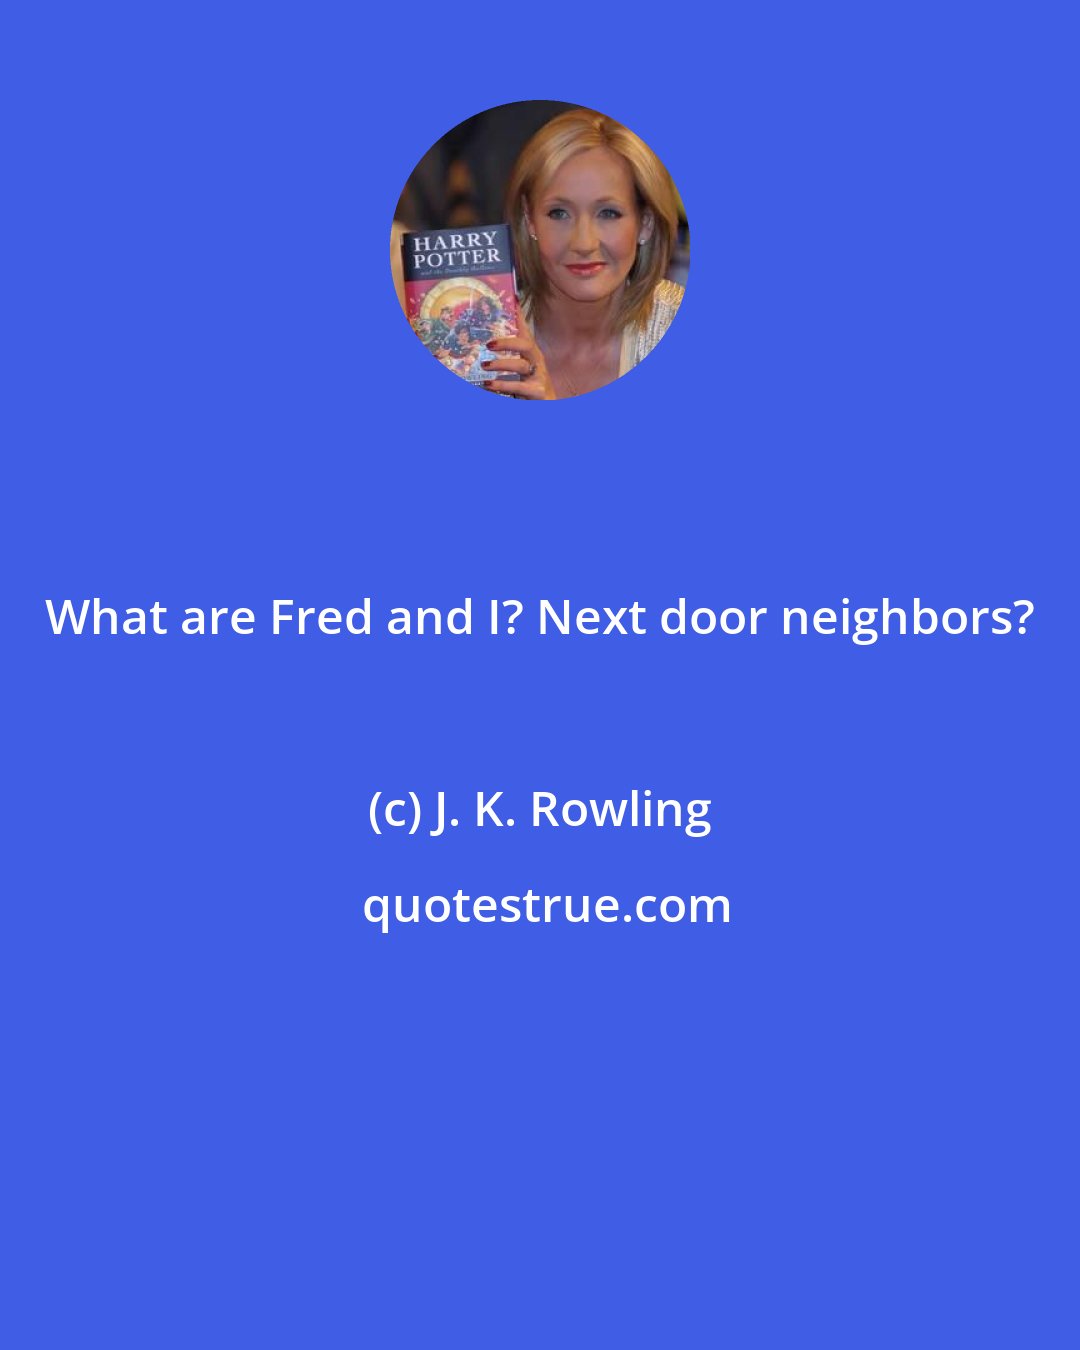 J. K. Rowling: What are Fred and I? Next door neighbors?